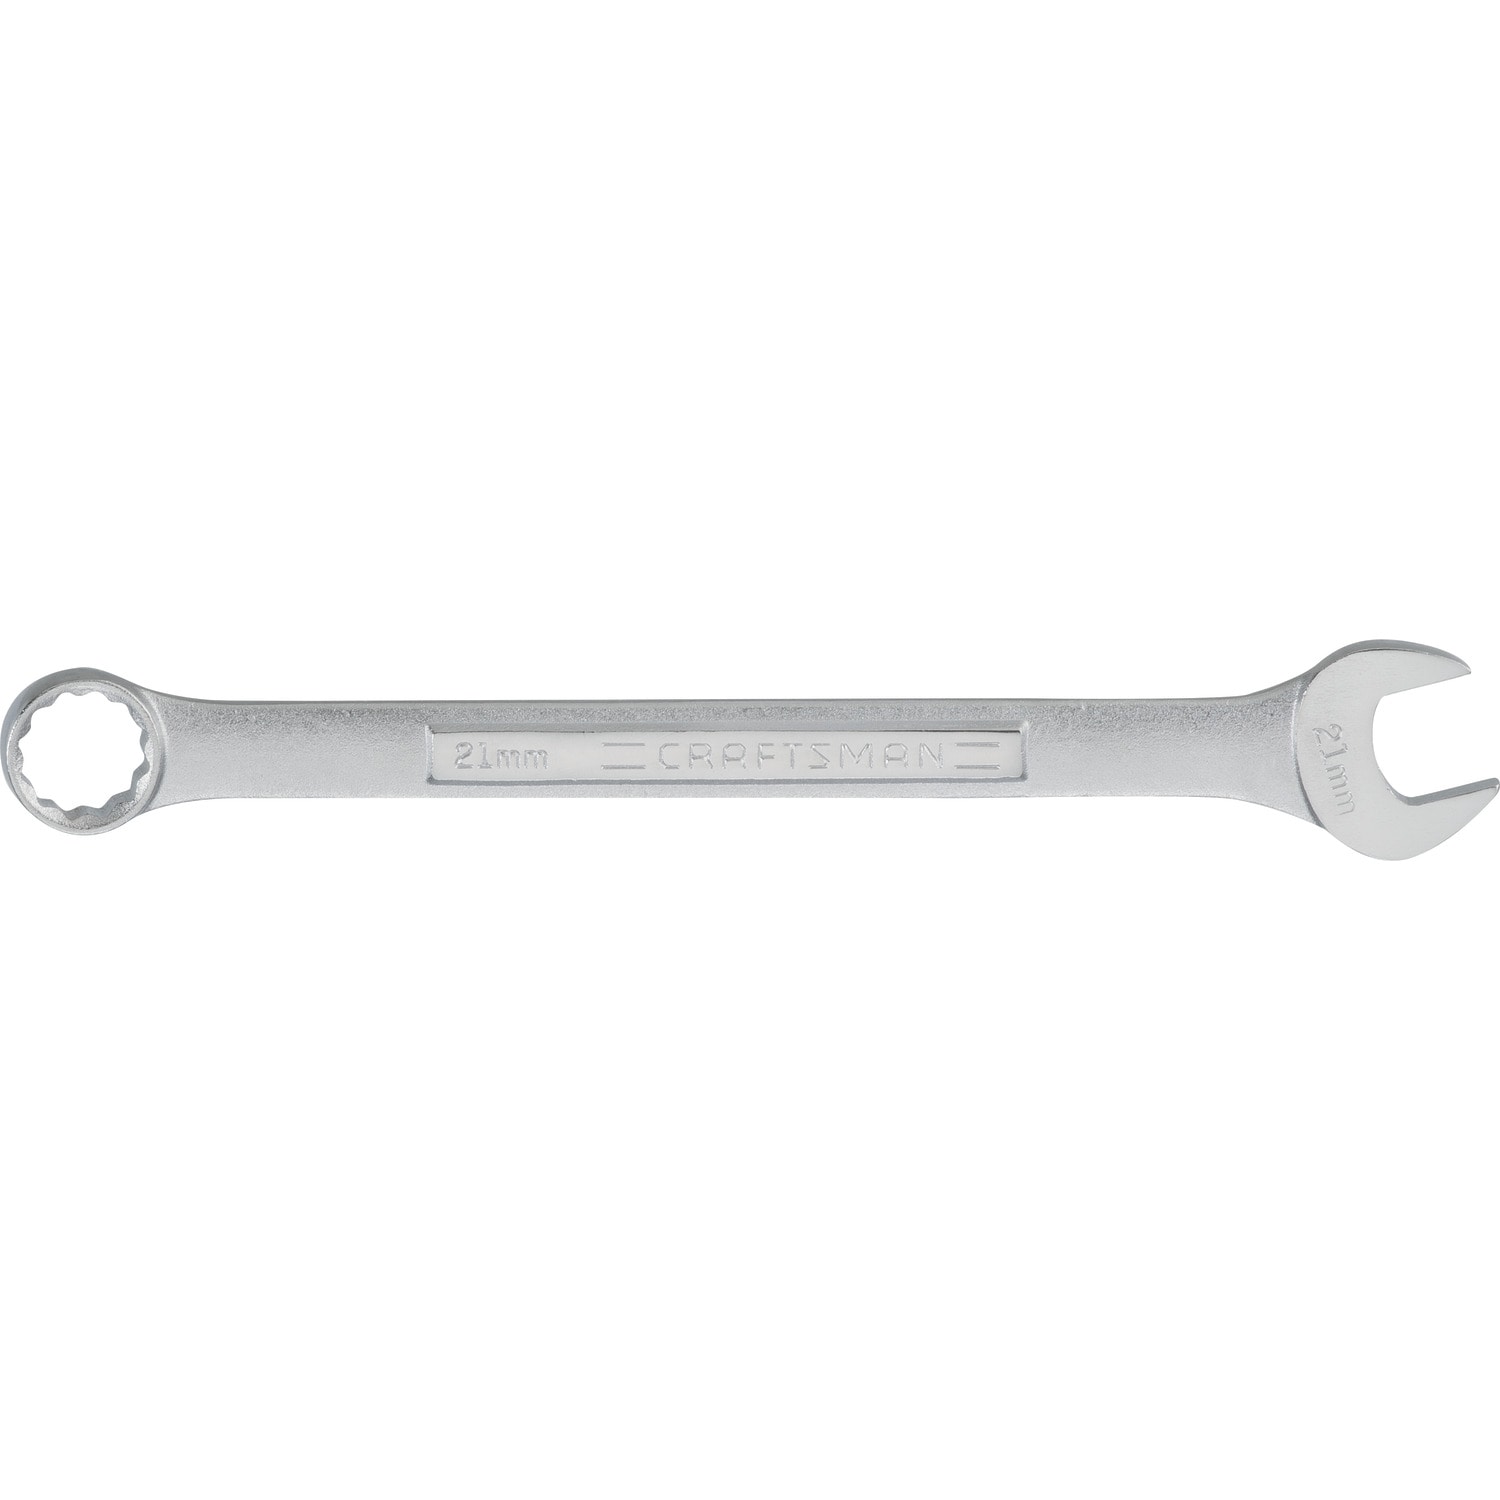 Box End Striking Wrench: 32 mm, 12 Point, Single End